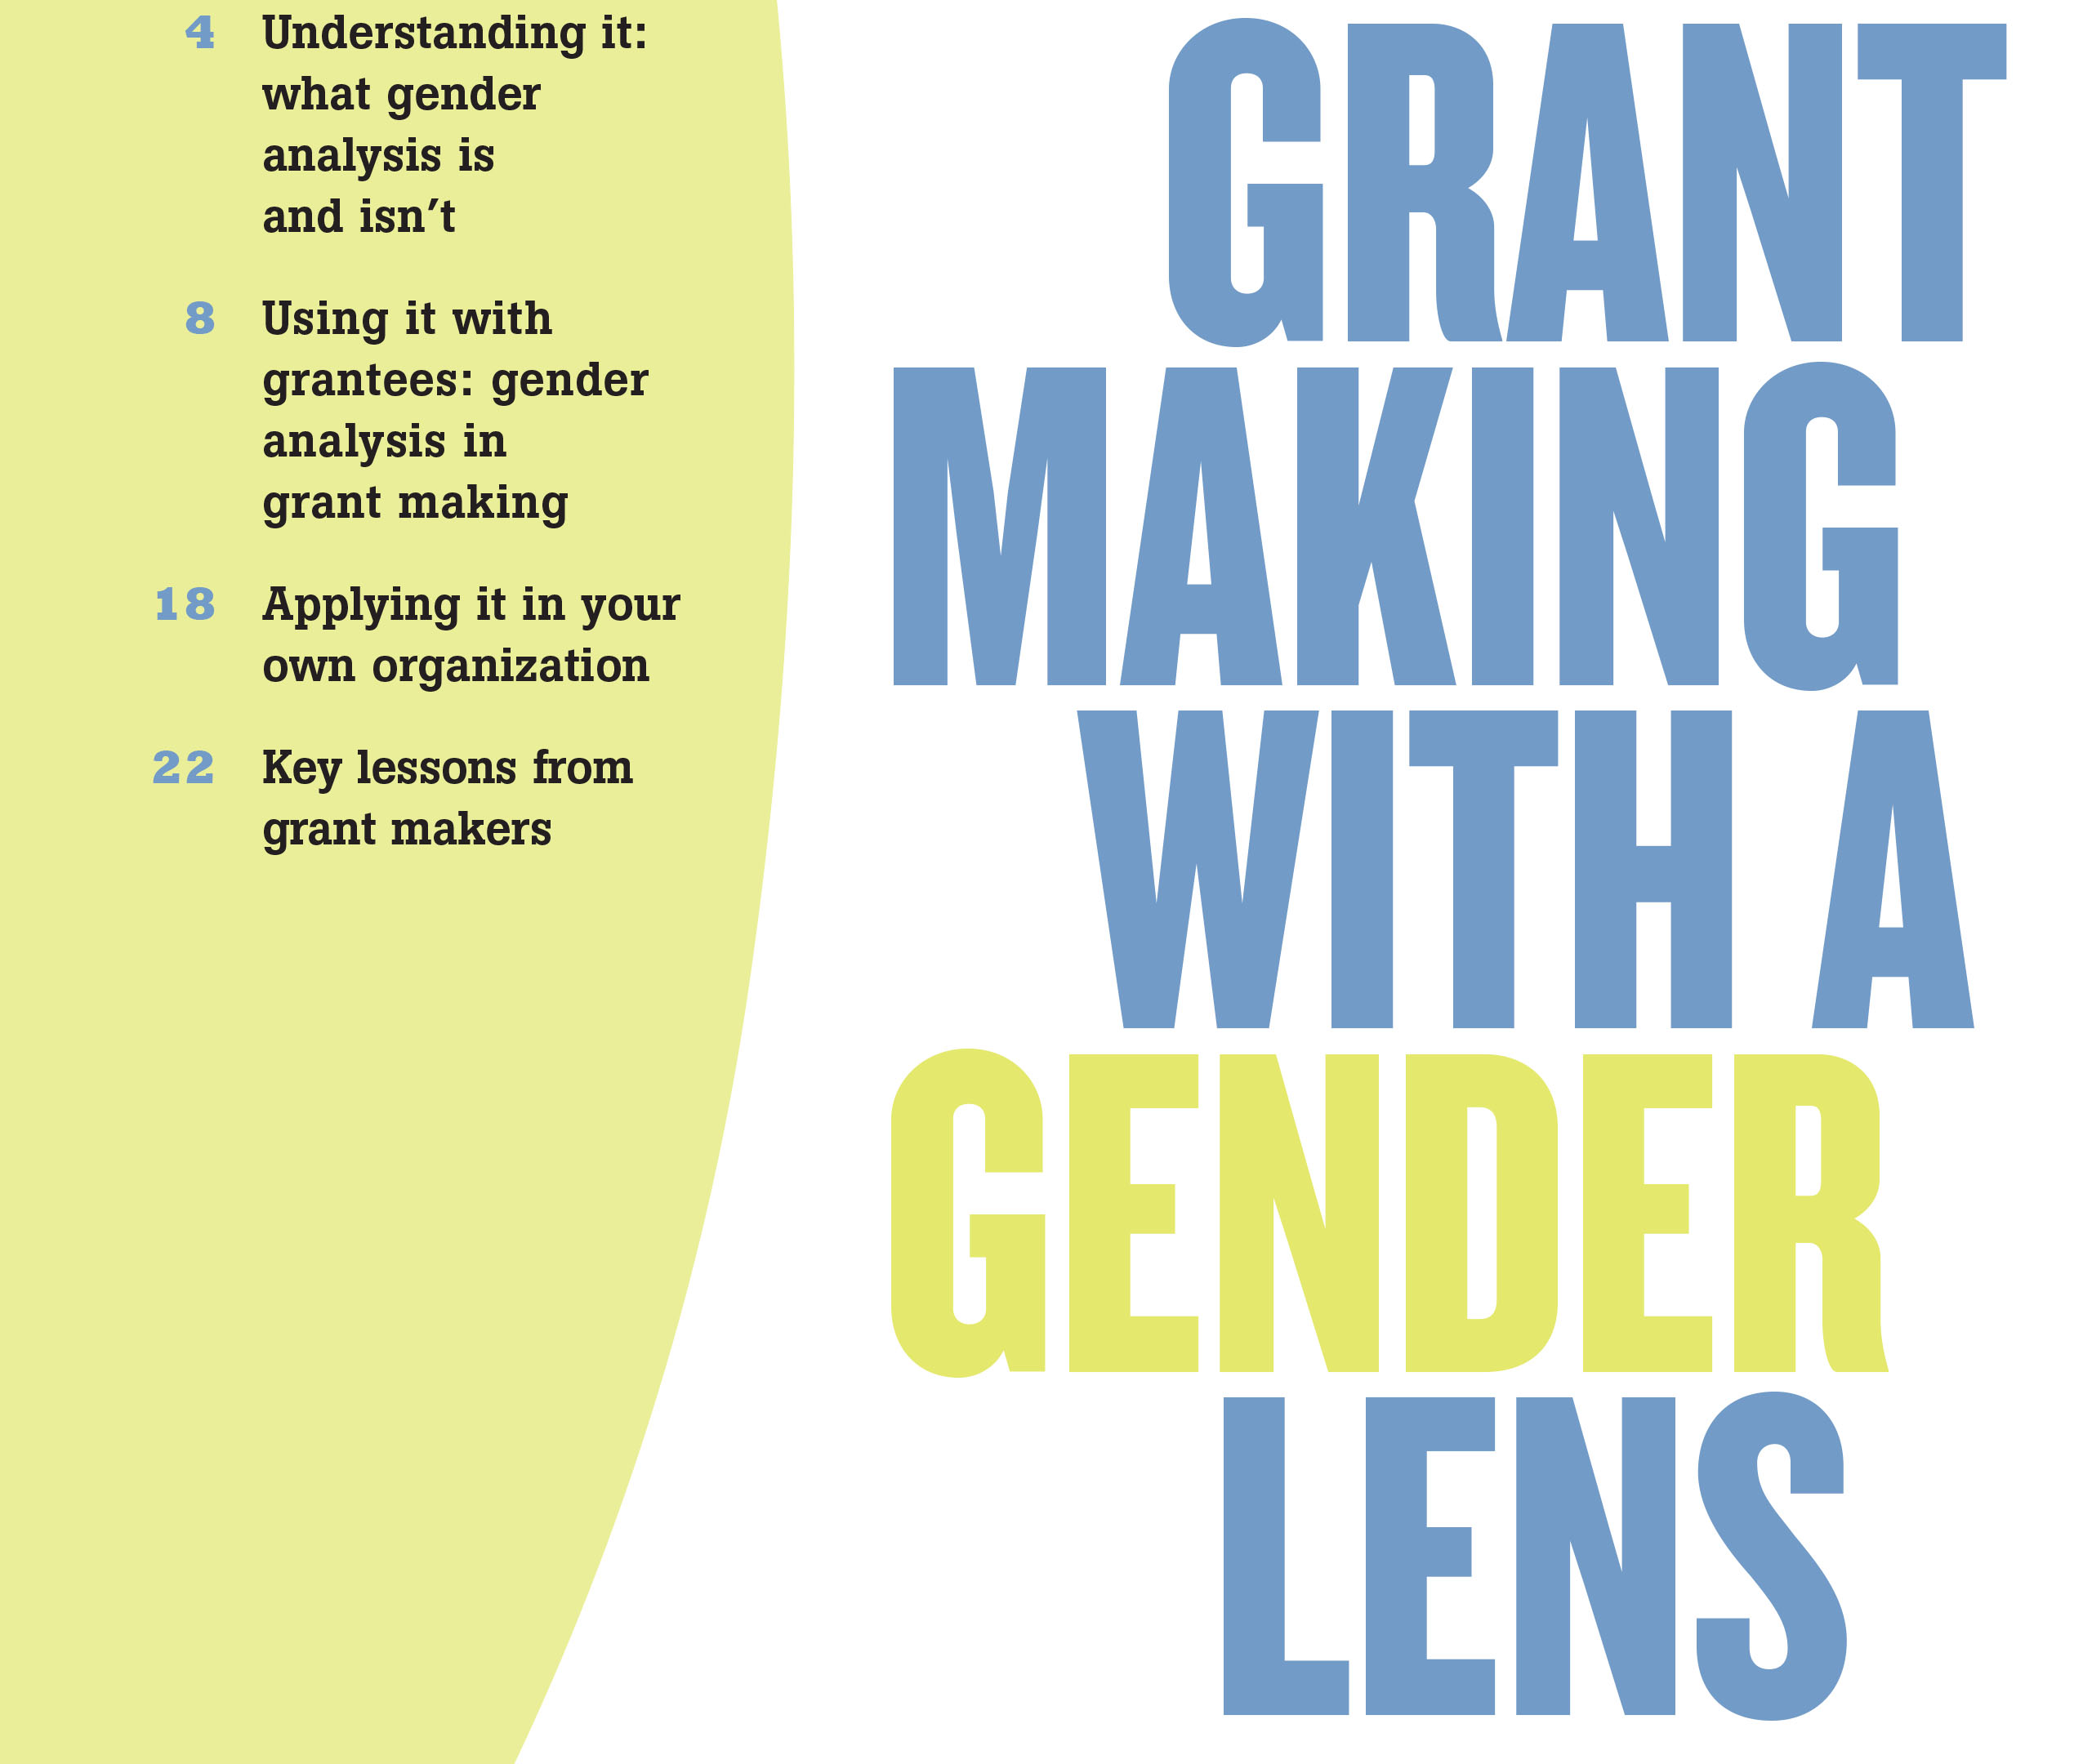 Grantmaking with a Gender Lens